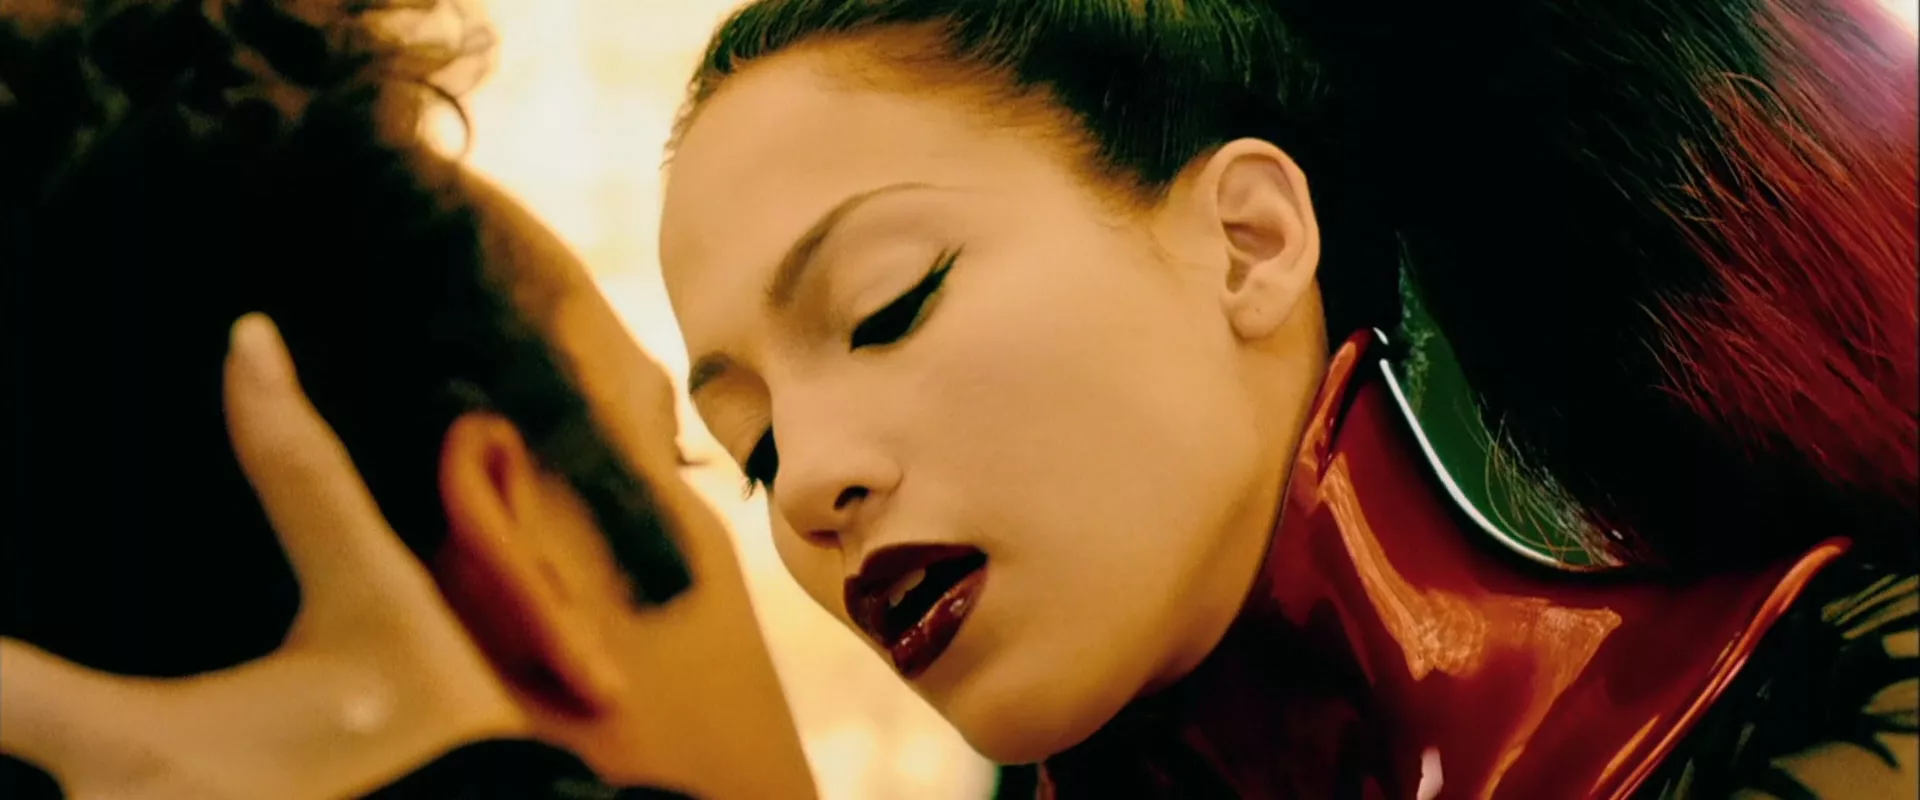 Jennifer Lopez as cyberpunk sphinx going for a kiss with a man